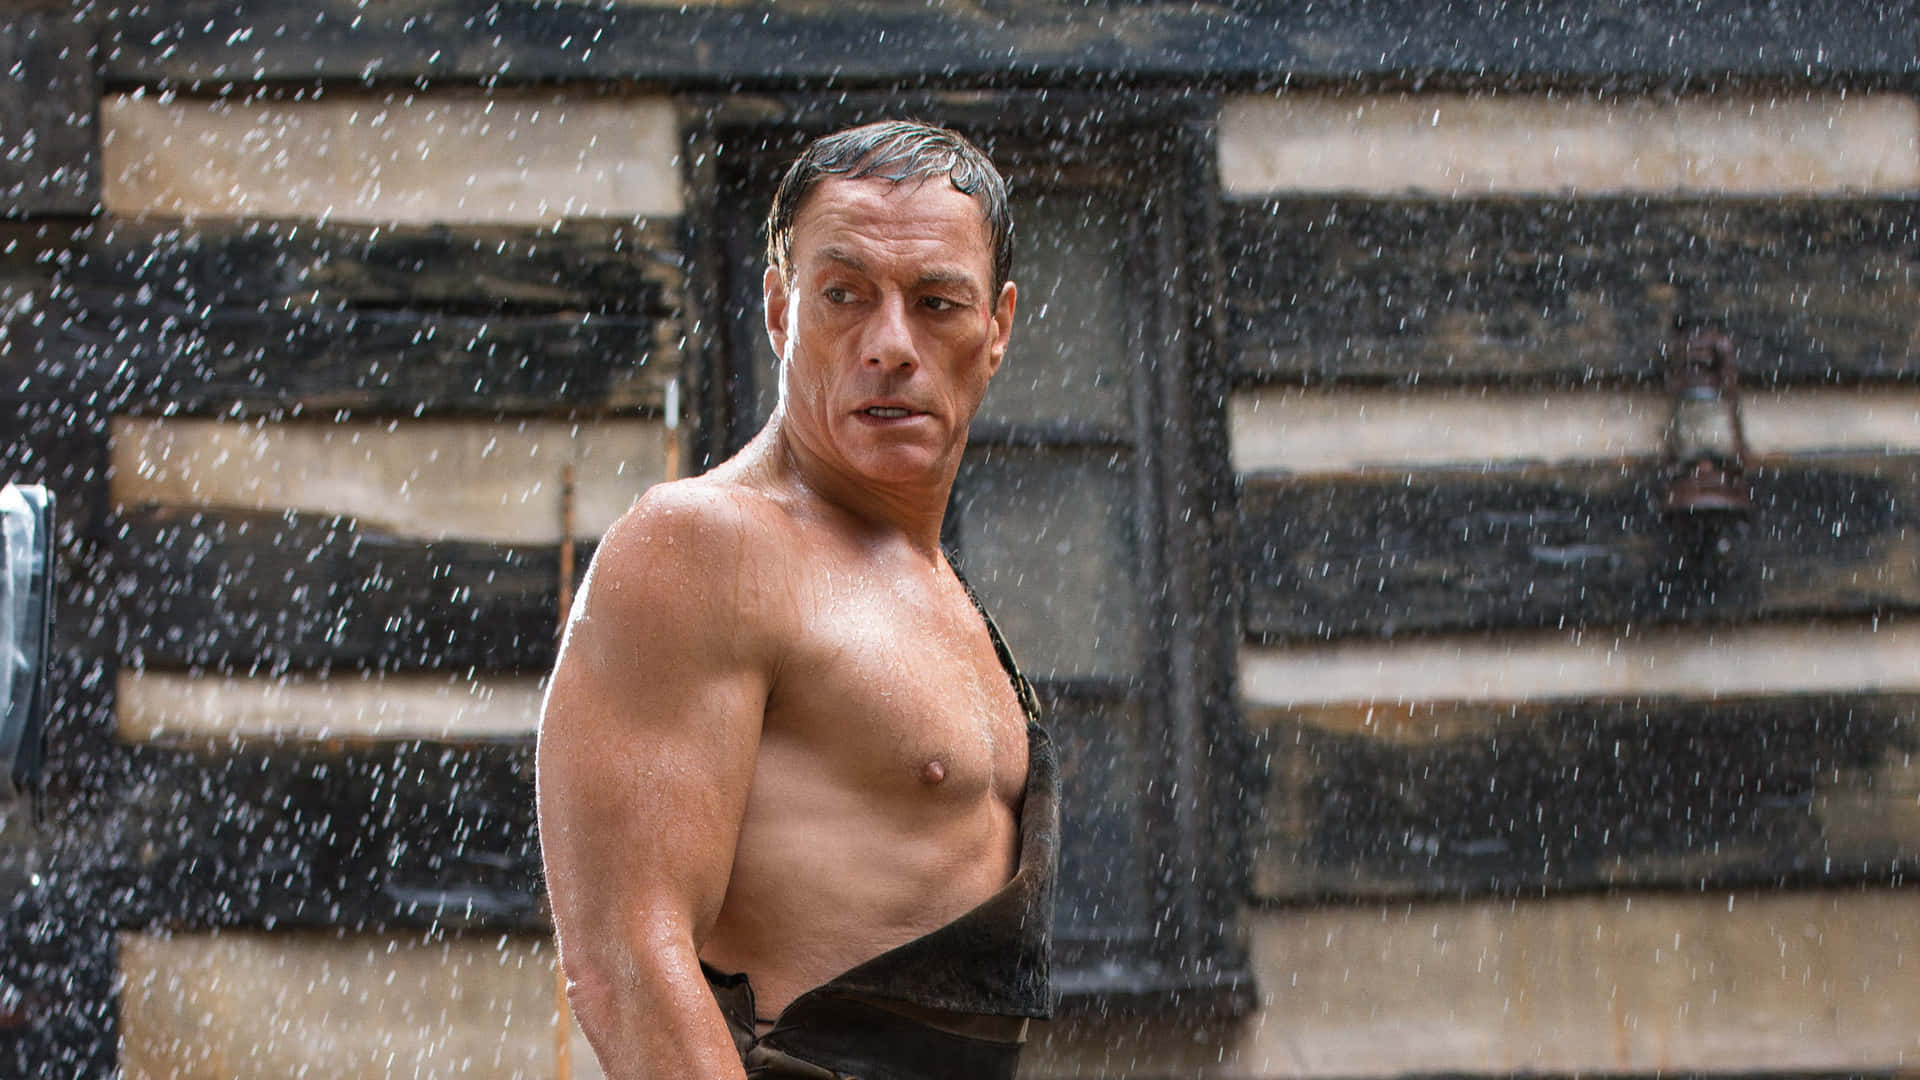 Jean Claude Van Damme Flexing His Muscled Stance